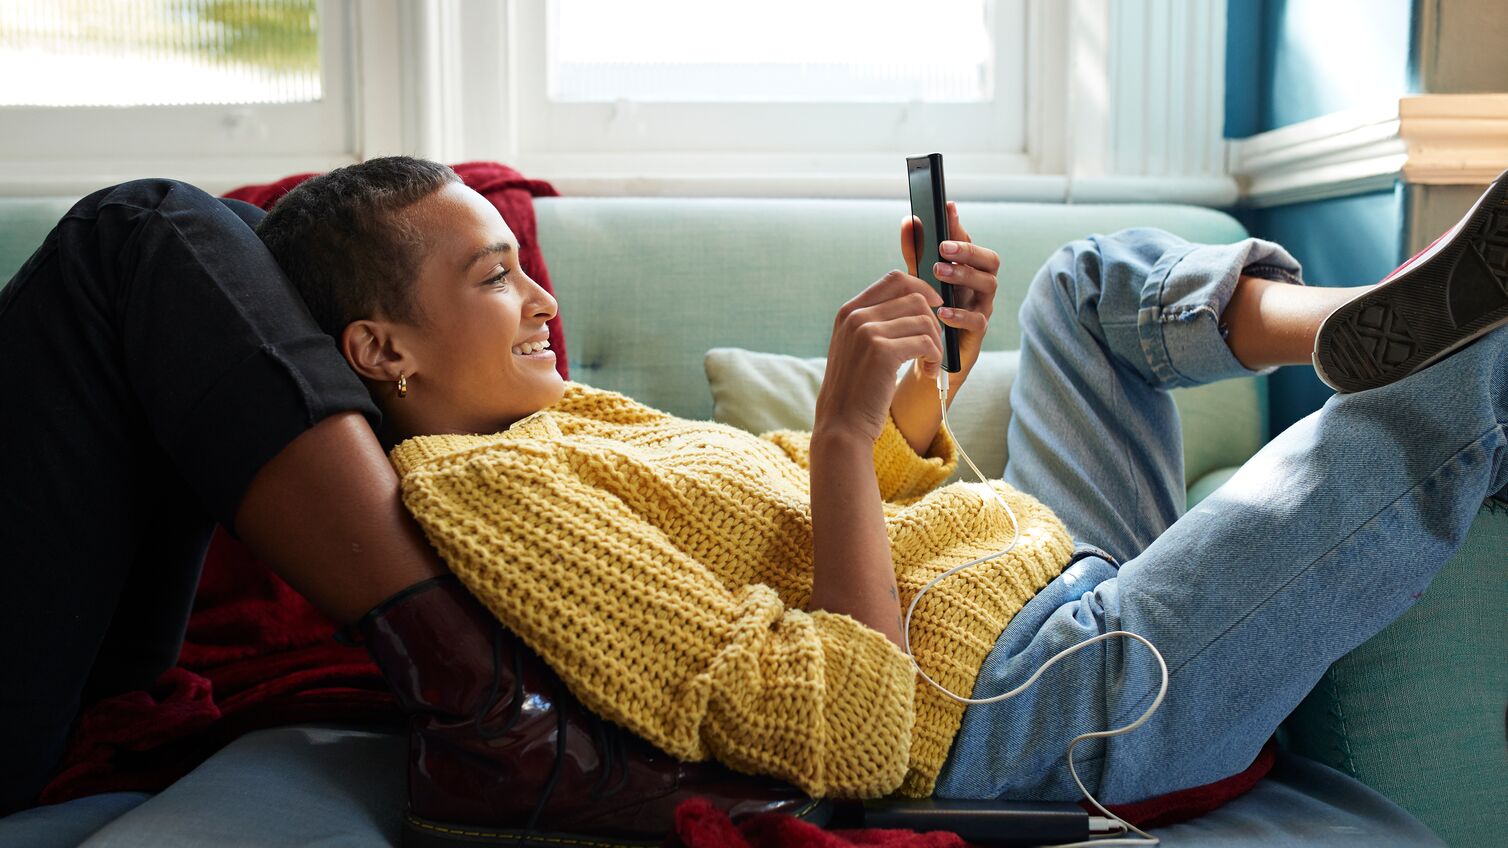 Smiling woman text messaging on smart phone while leaning on friend's leg in living room